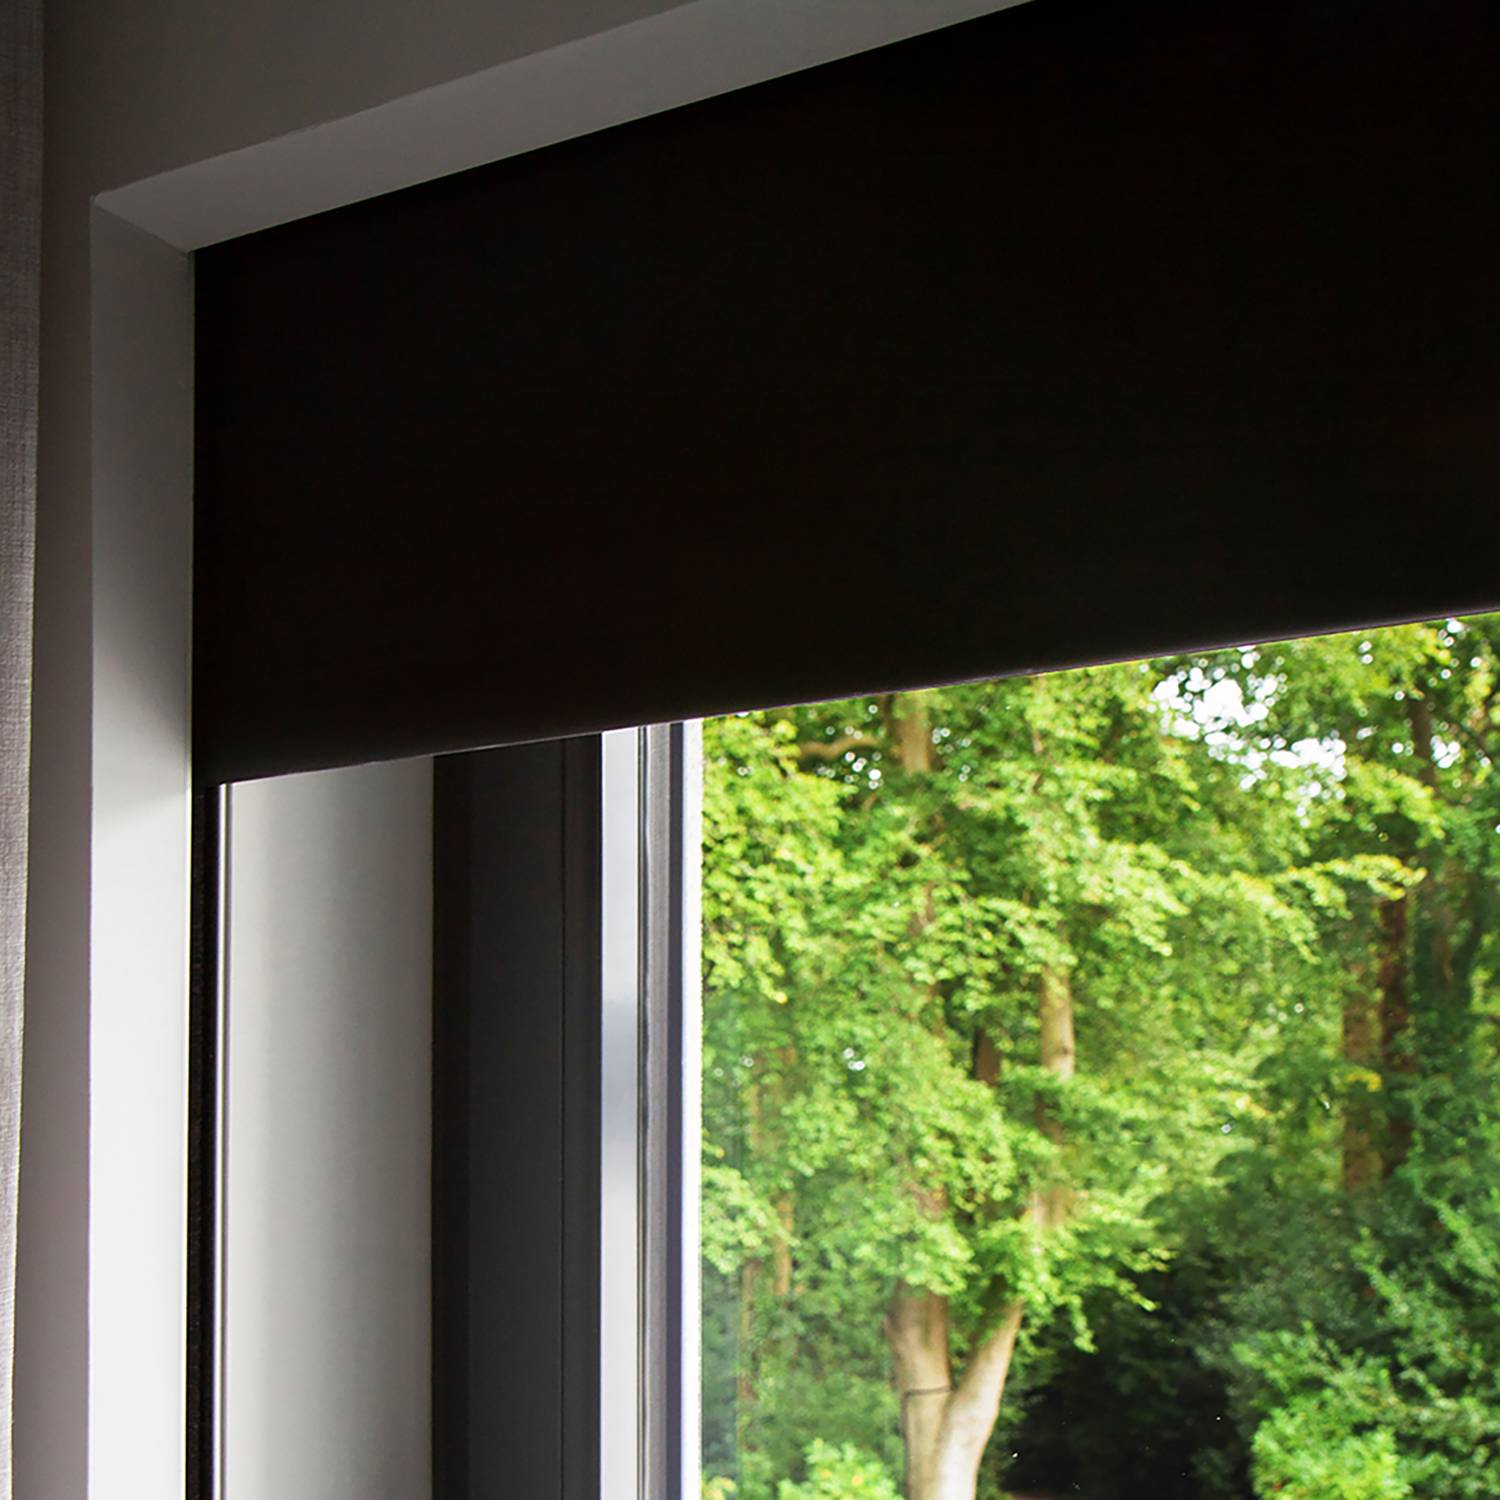 Blindspace Modular M Series to Conceal Blinds - Concealment Box for Blinds